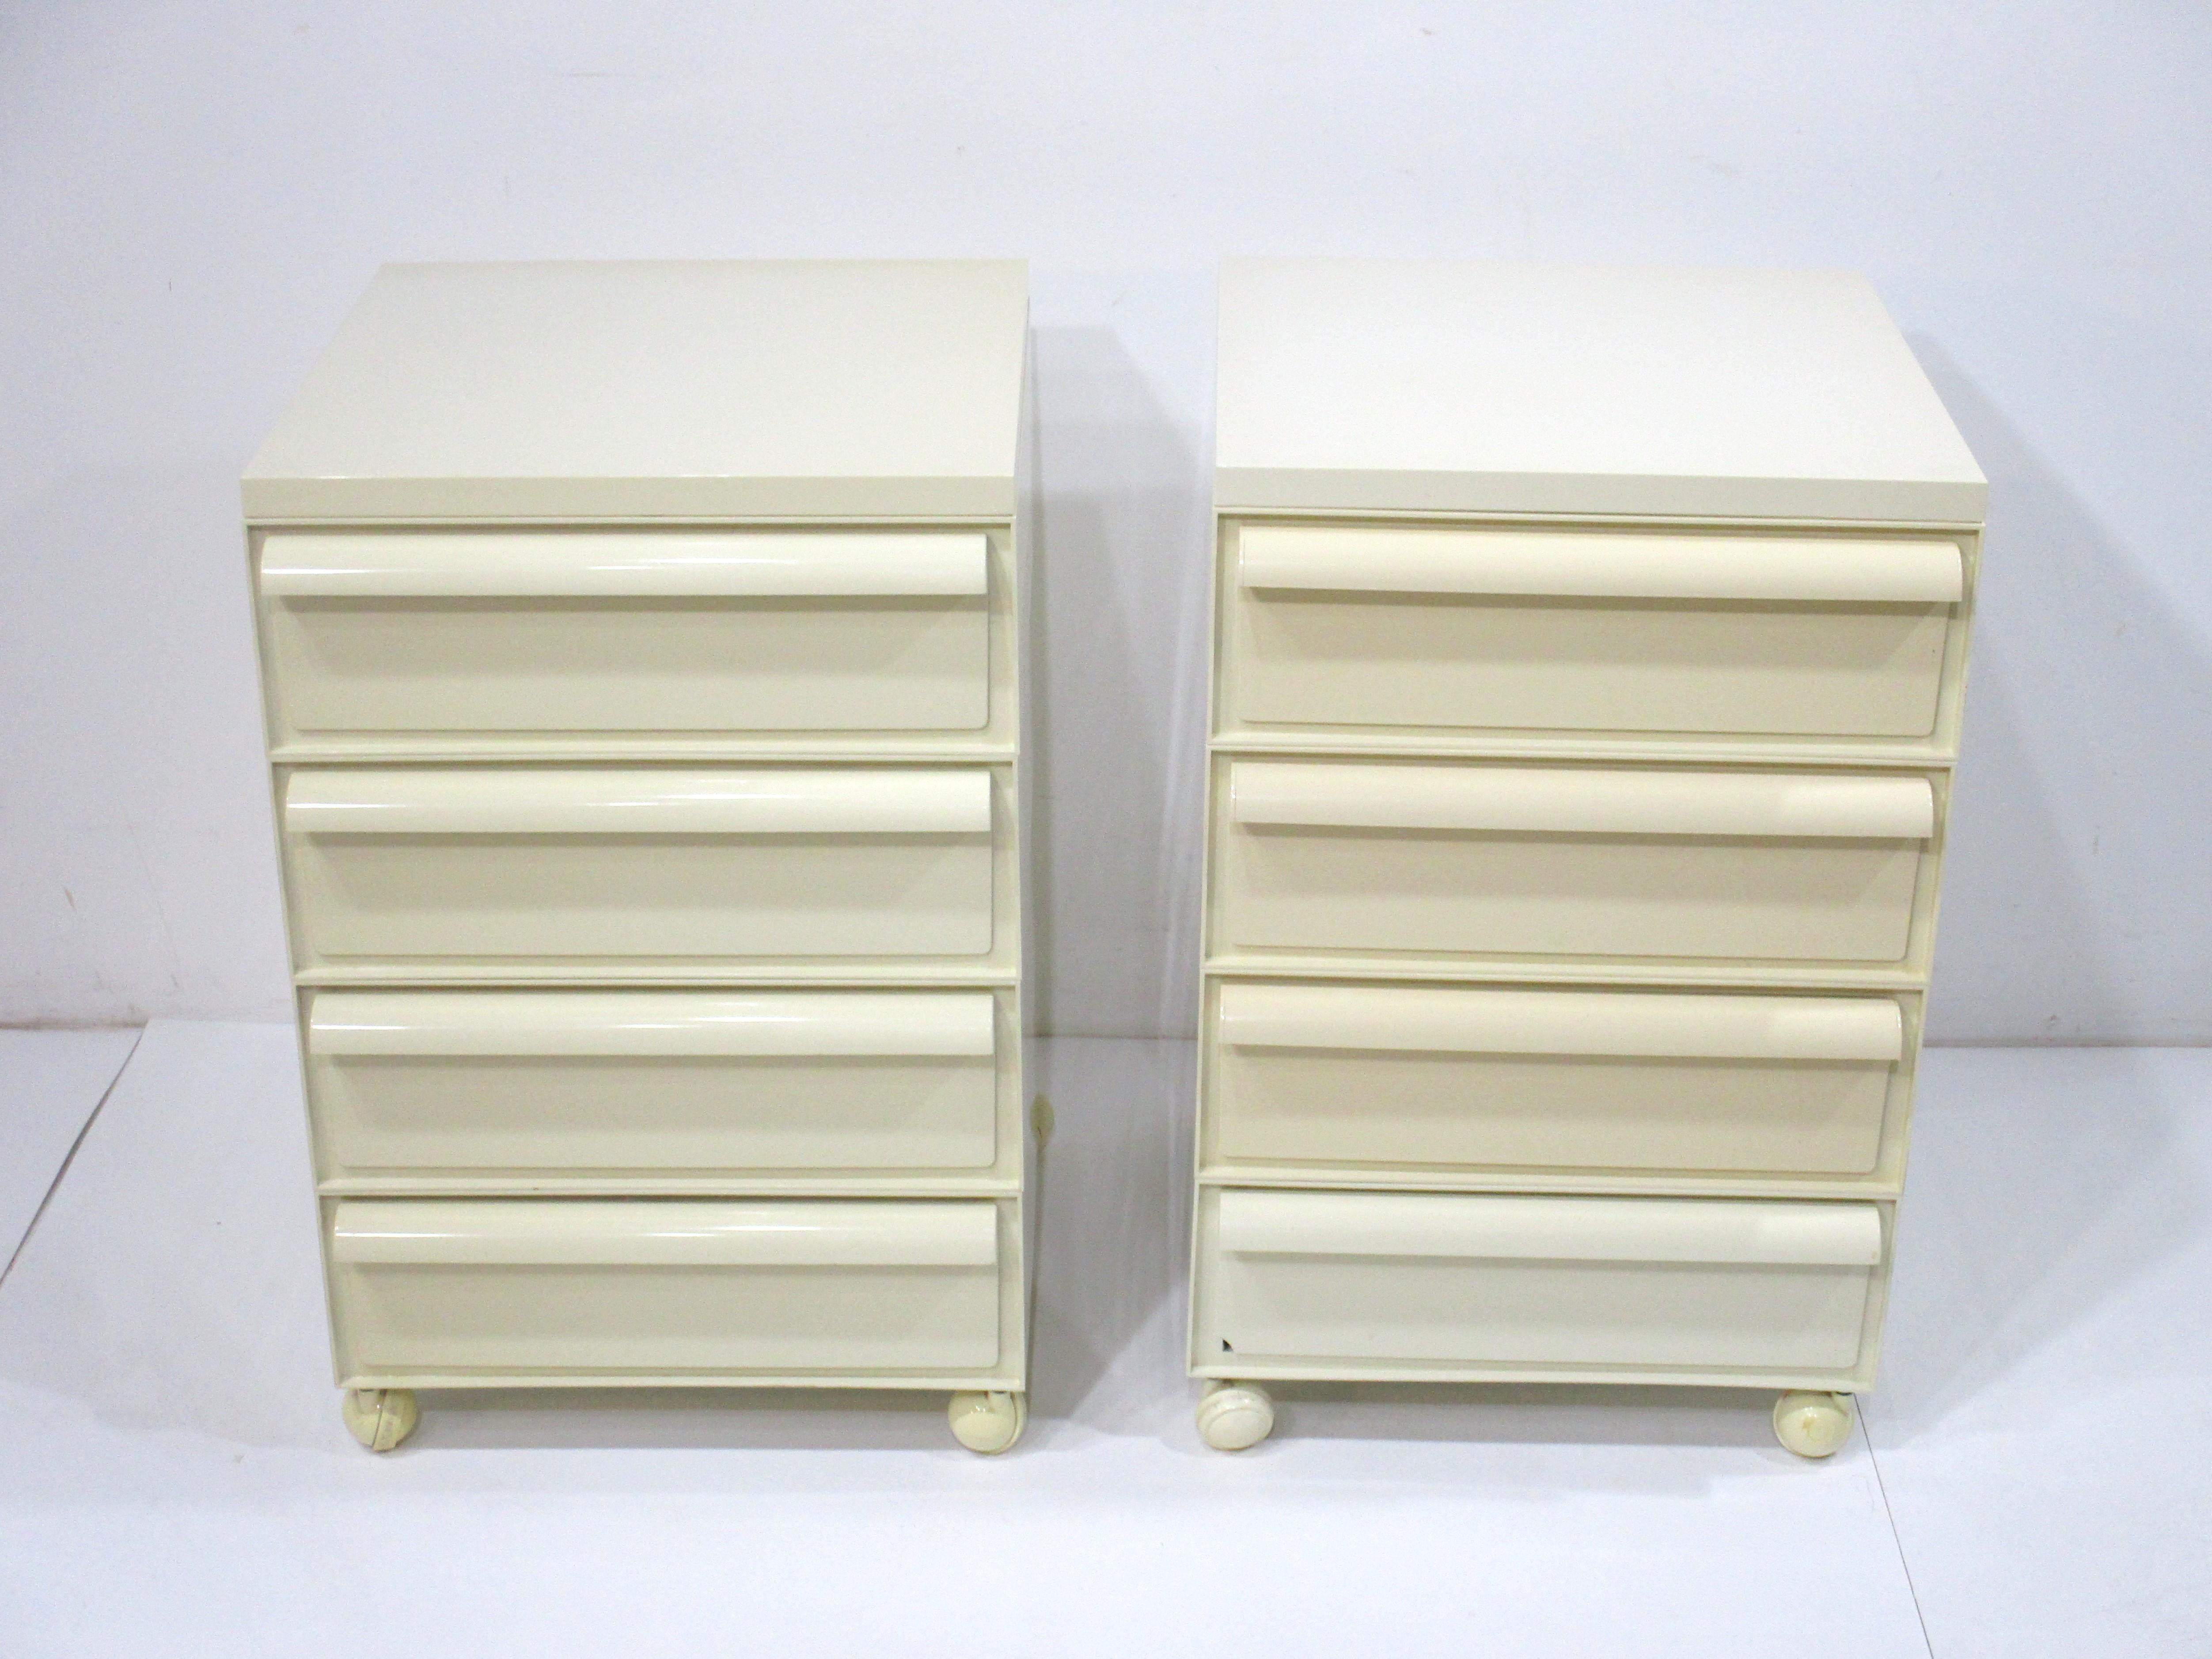 A pair of ABS plastic formed nightstands each having four drawers and sitting on matching wheels . These space age pop modern looking pieces are manufactured by Kartell and made in Italy , designed by Simmon - Fussell - Castelli , includes custom